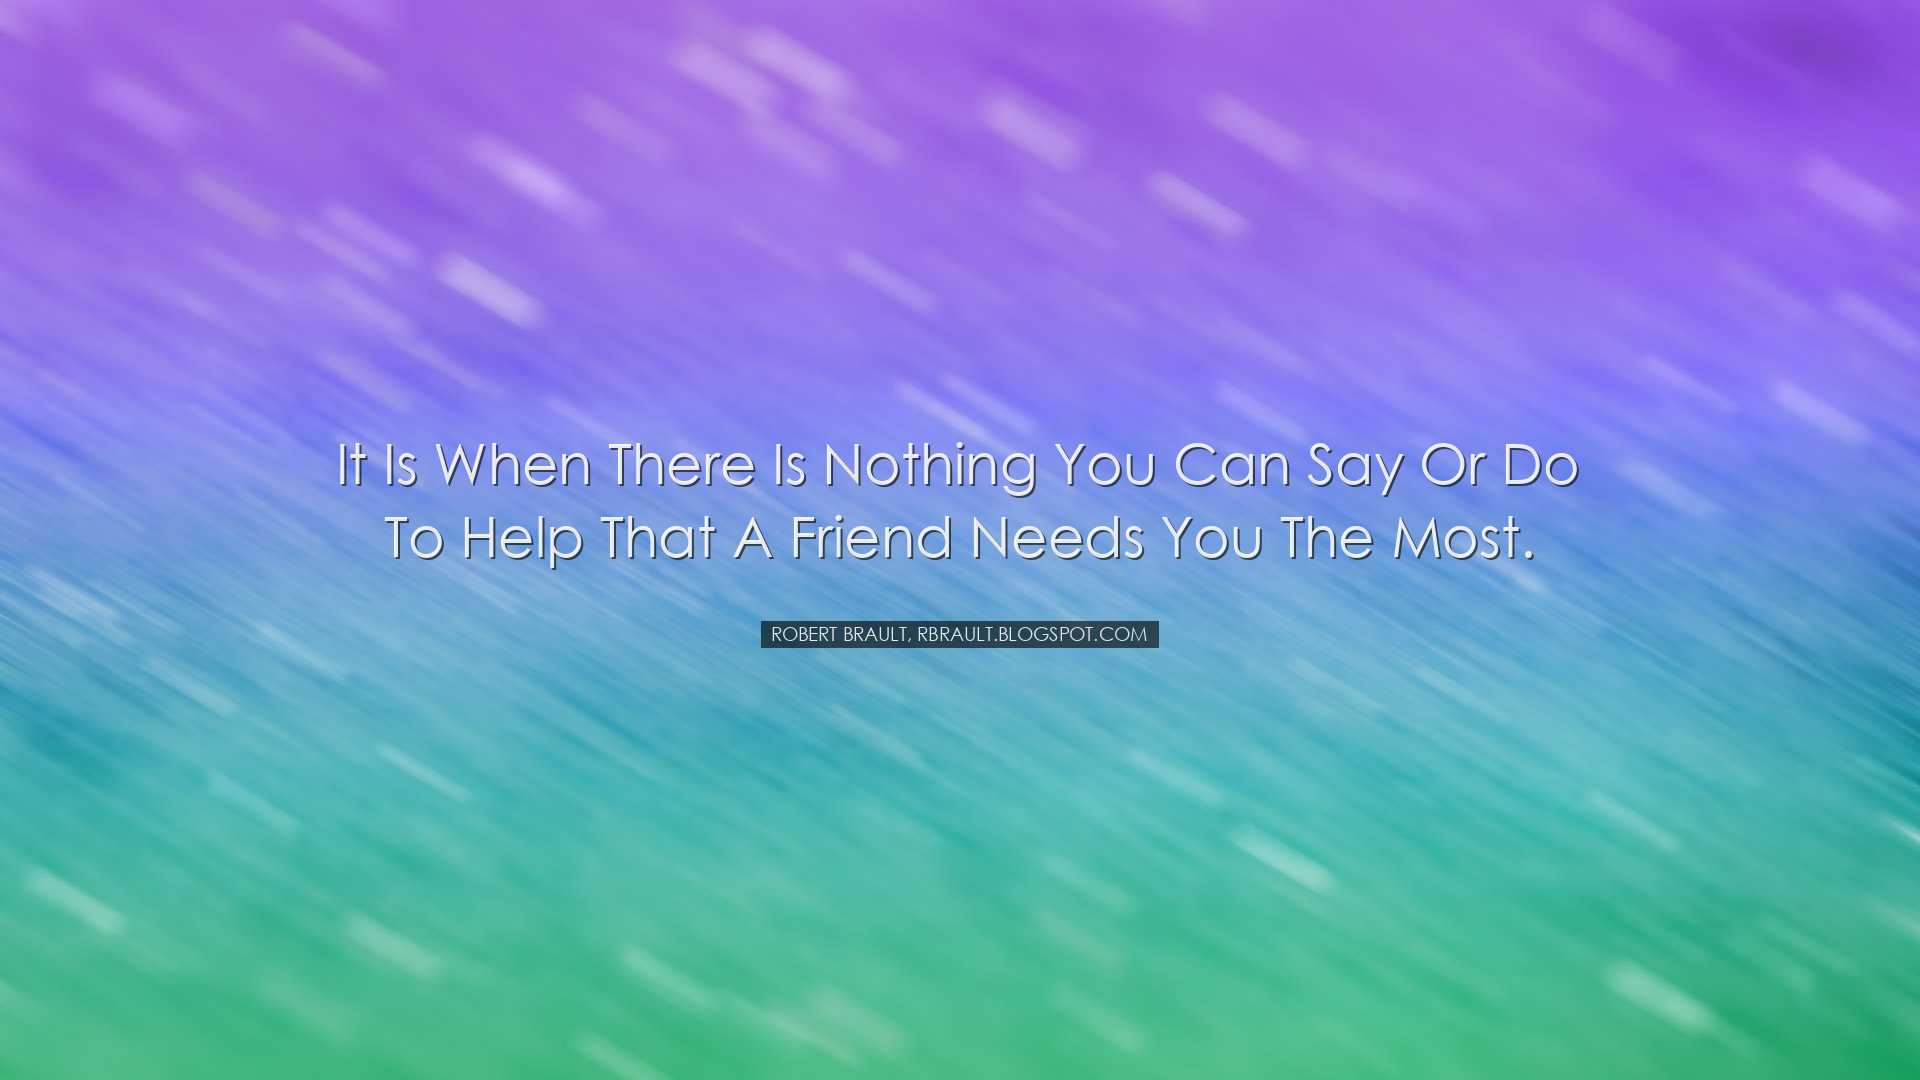 It is when there is nothing you can say or do to help that a frien